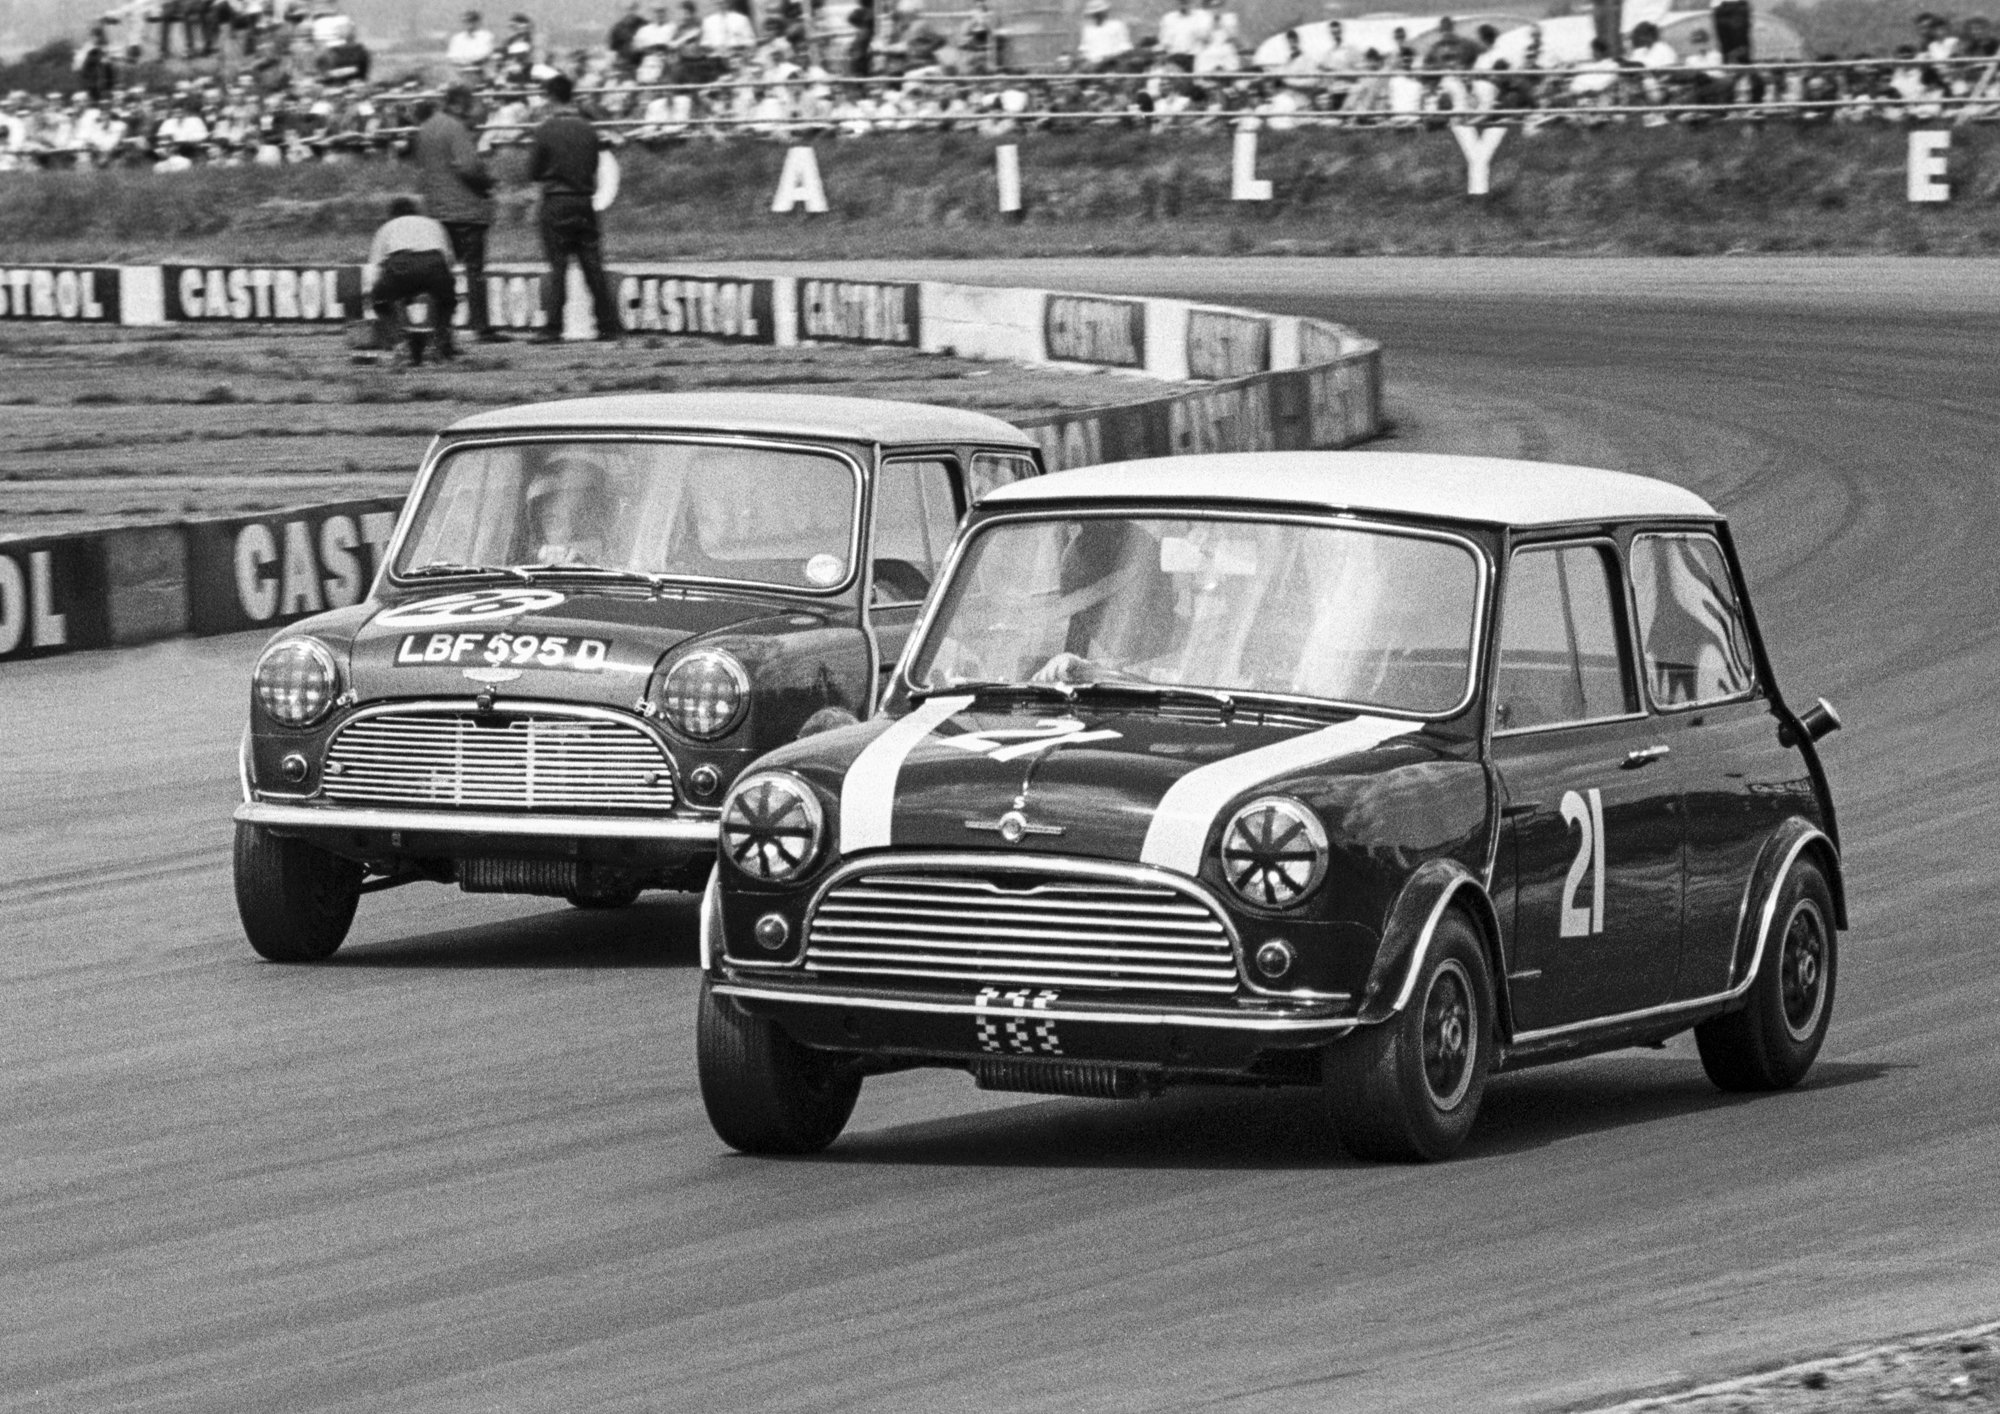 Minis at Silverstone in the 1960s